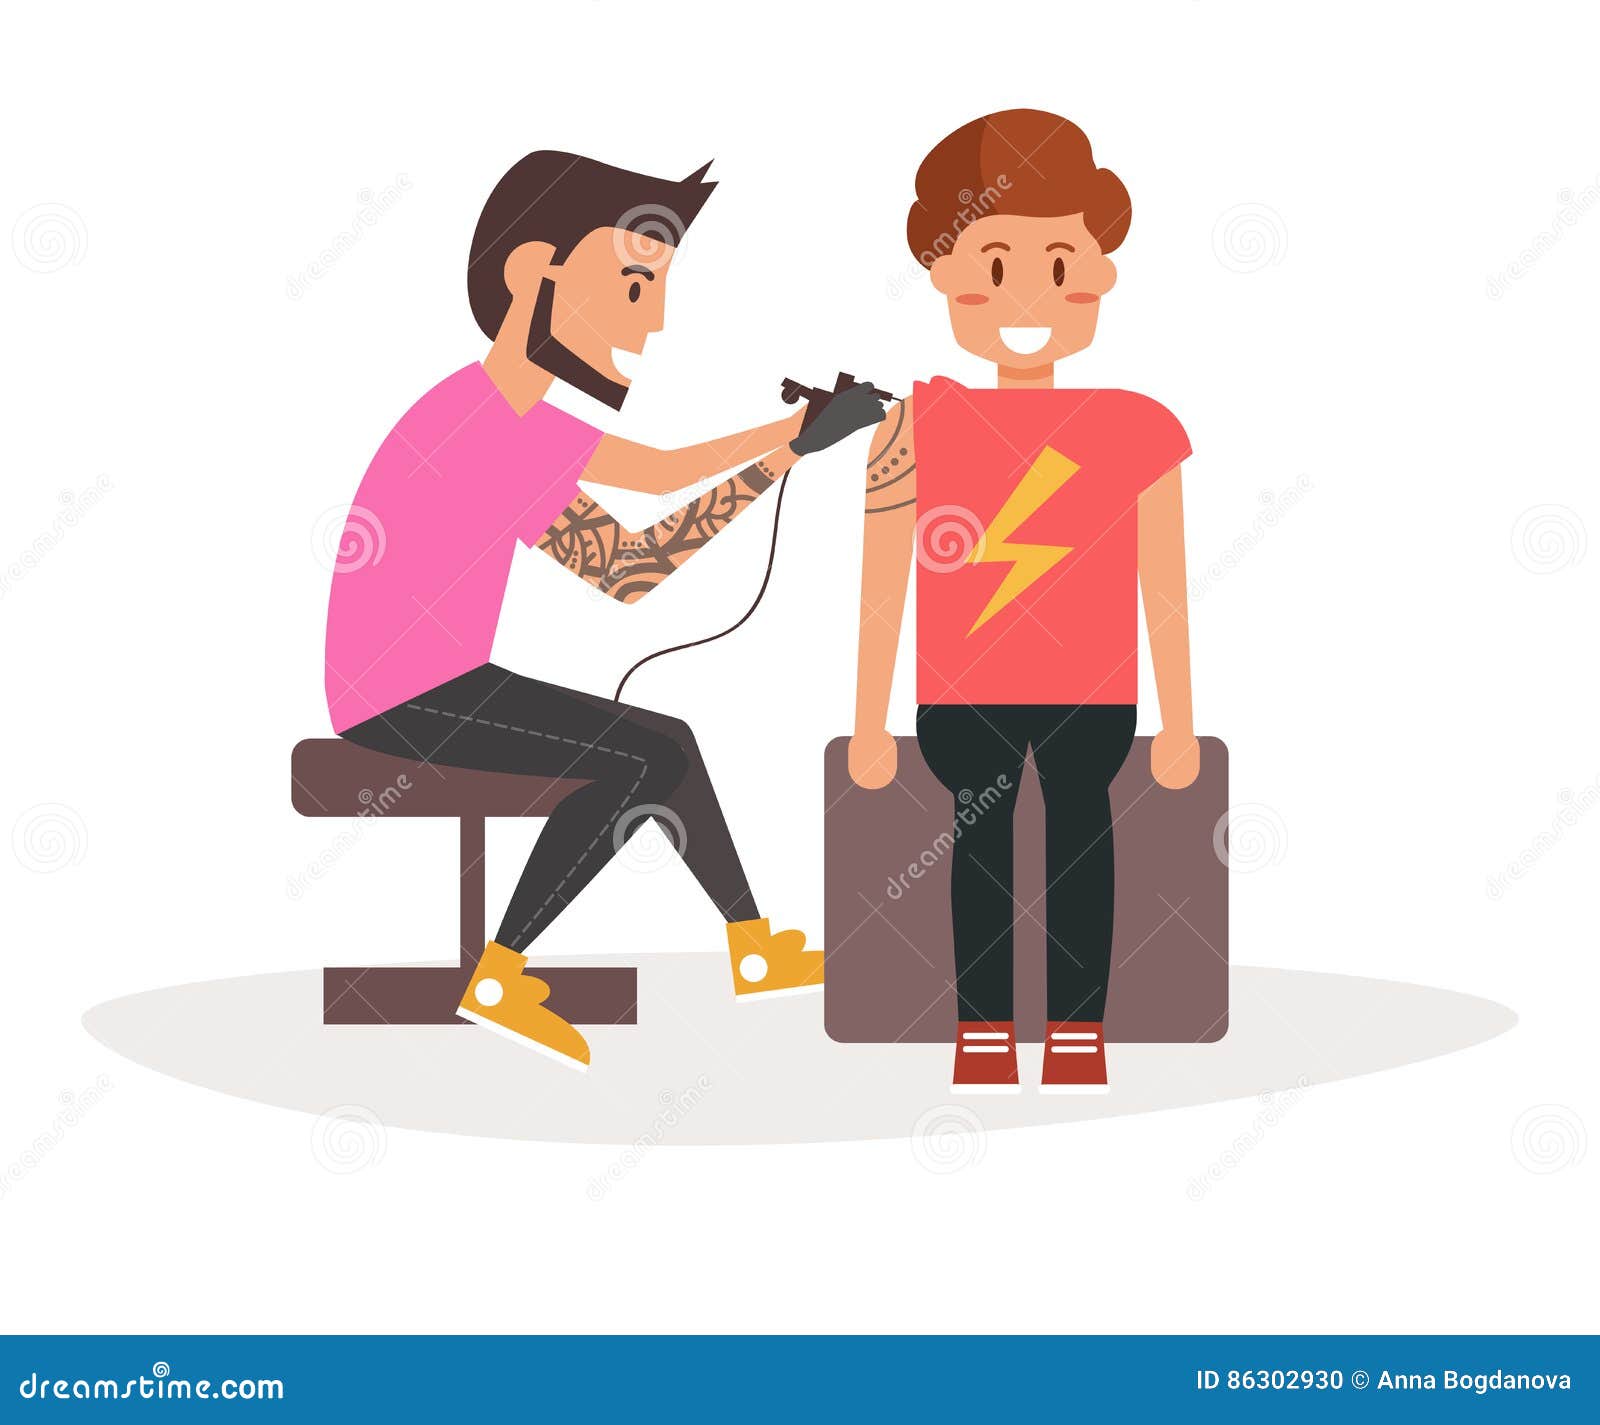 Tattoo Master Making Tattoo To a Man. Stock Vector - Illustration of create, paint: 86302930